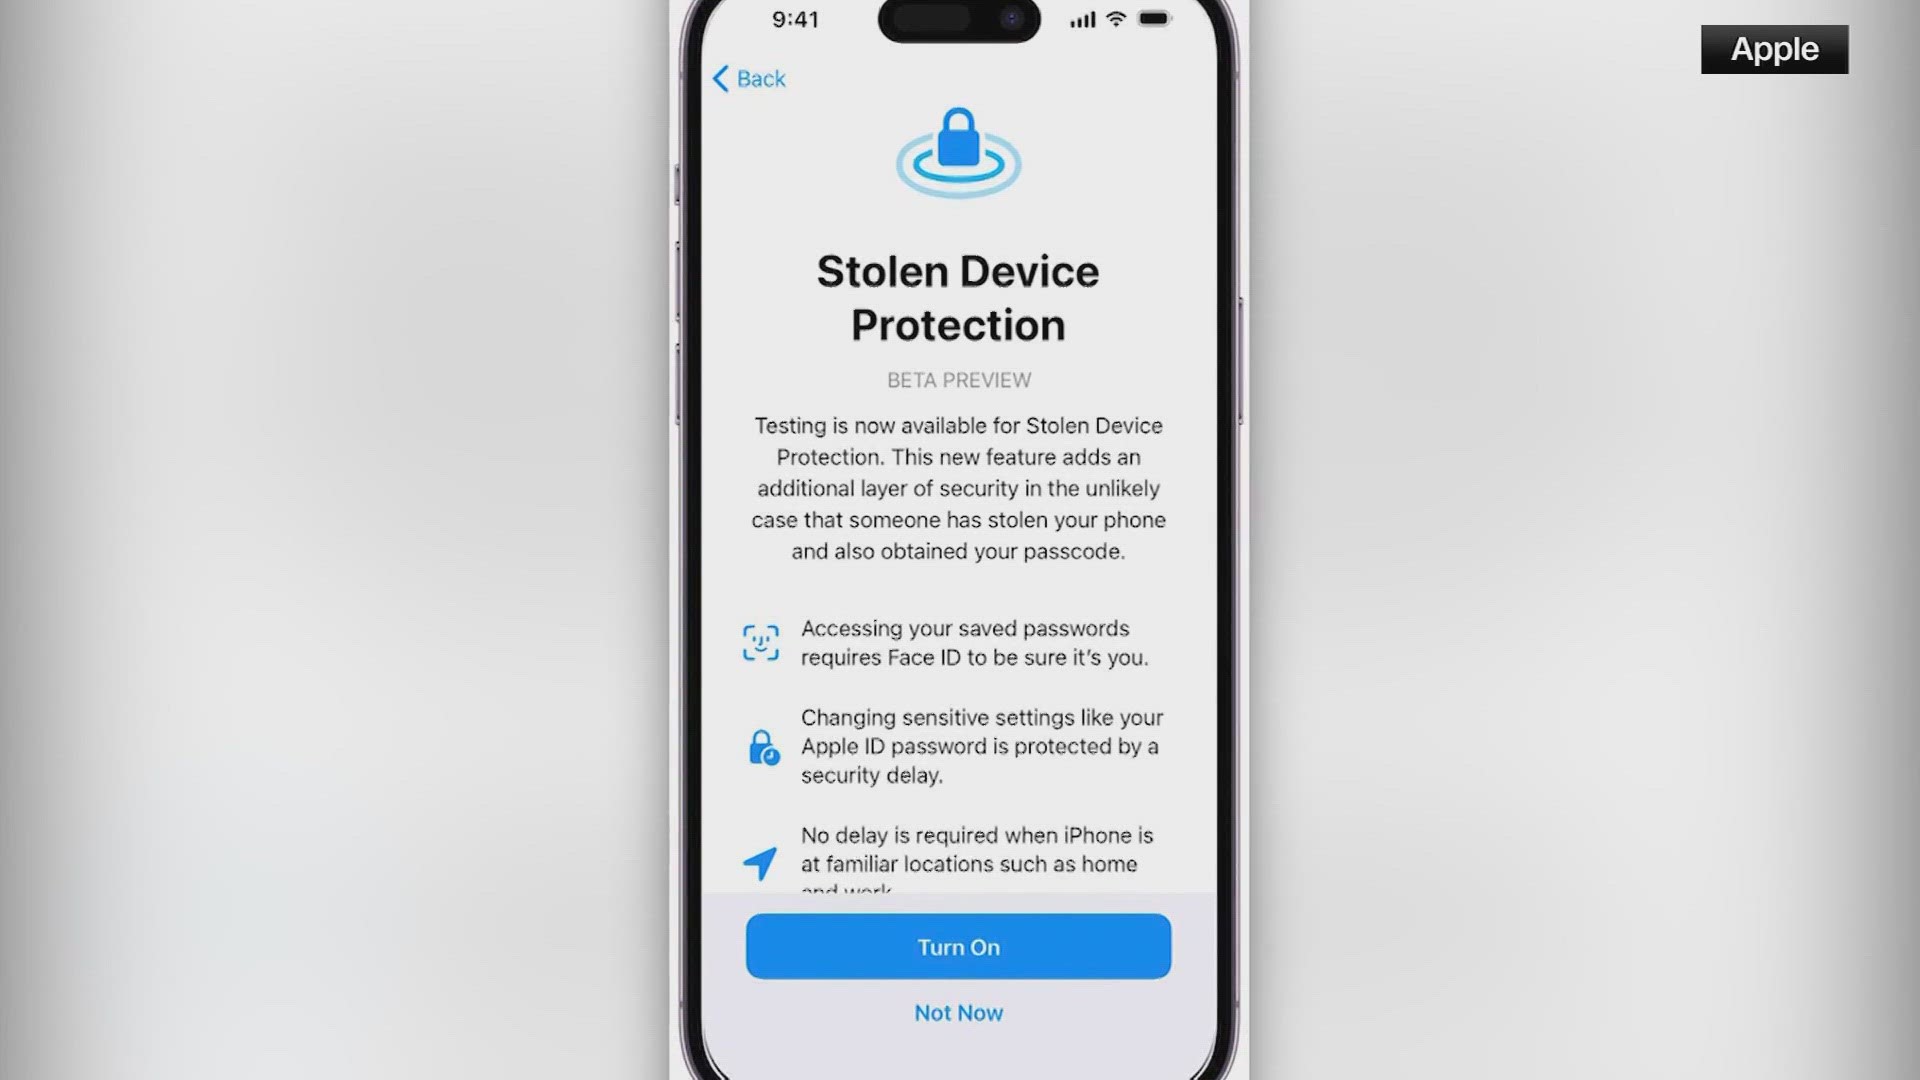 How to set up Apple's Stolen Device Protection on iPhones